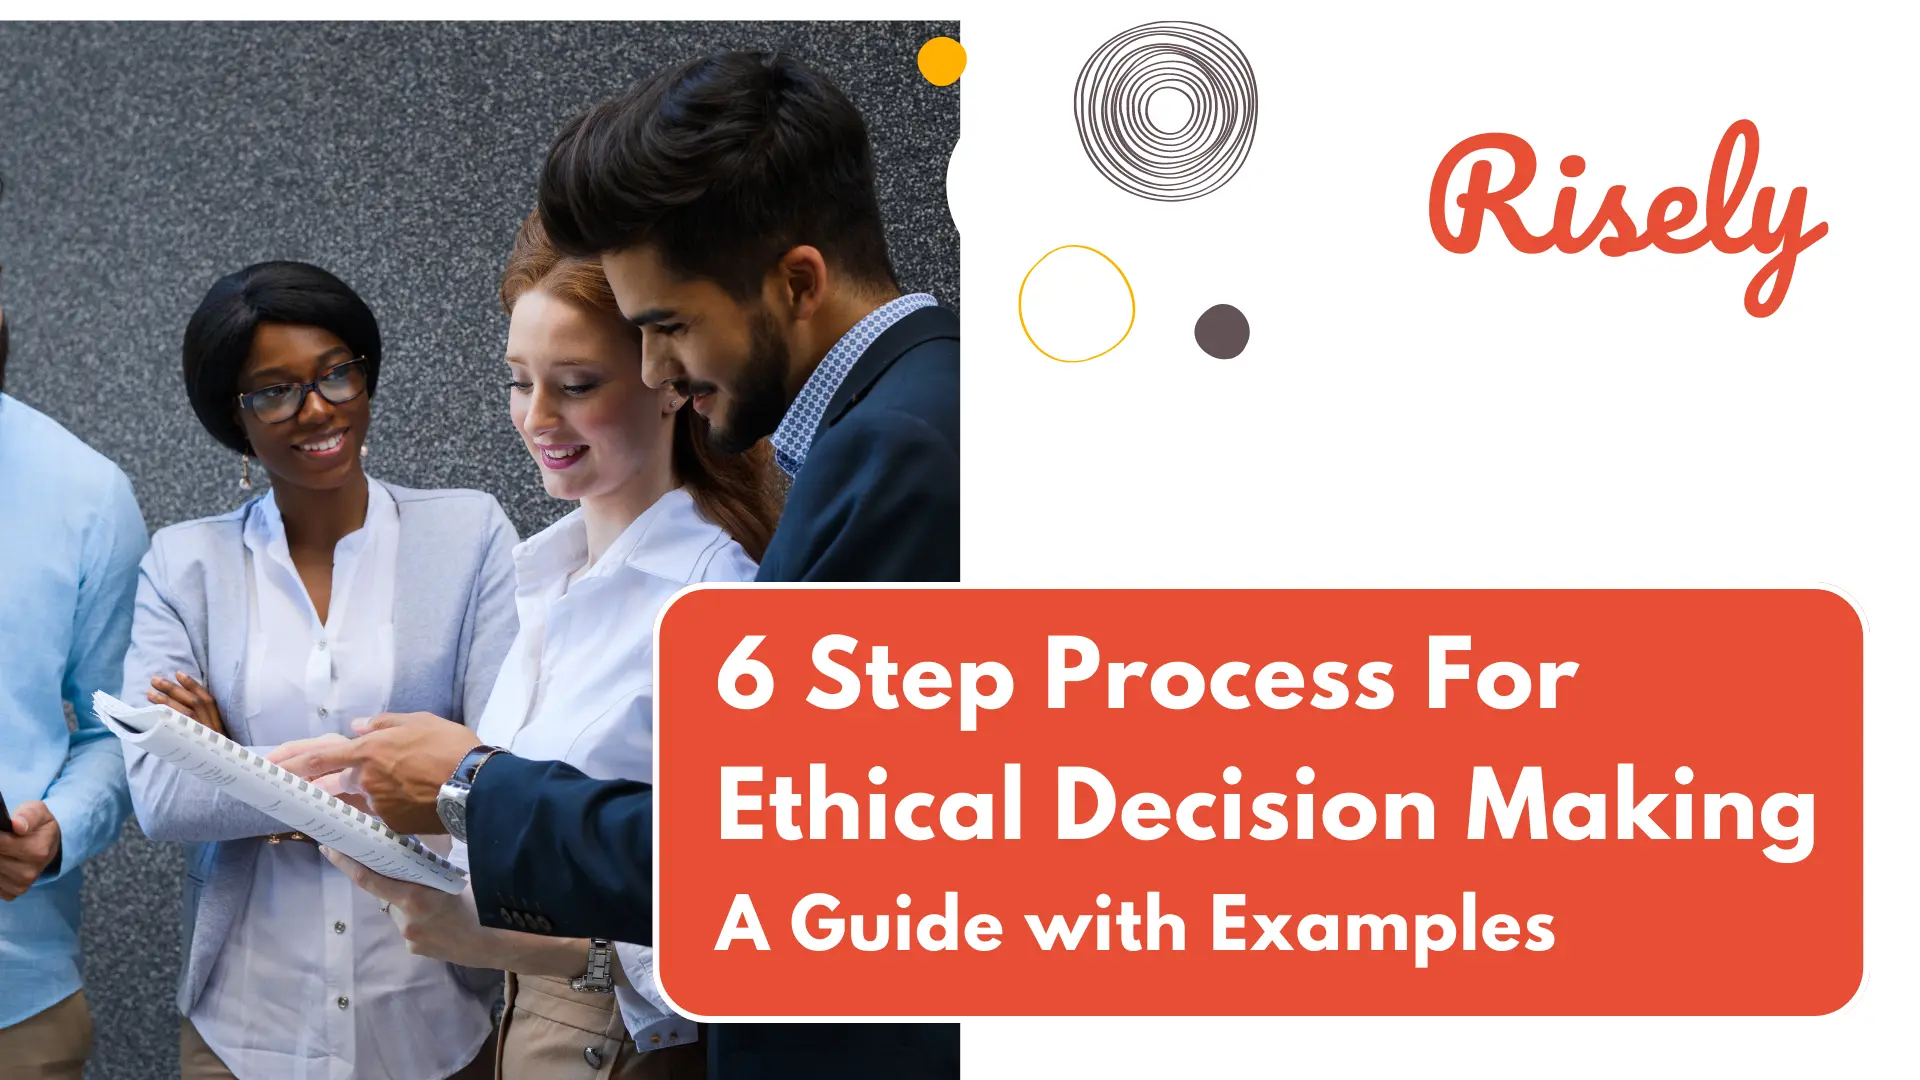 Ethical decision making